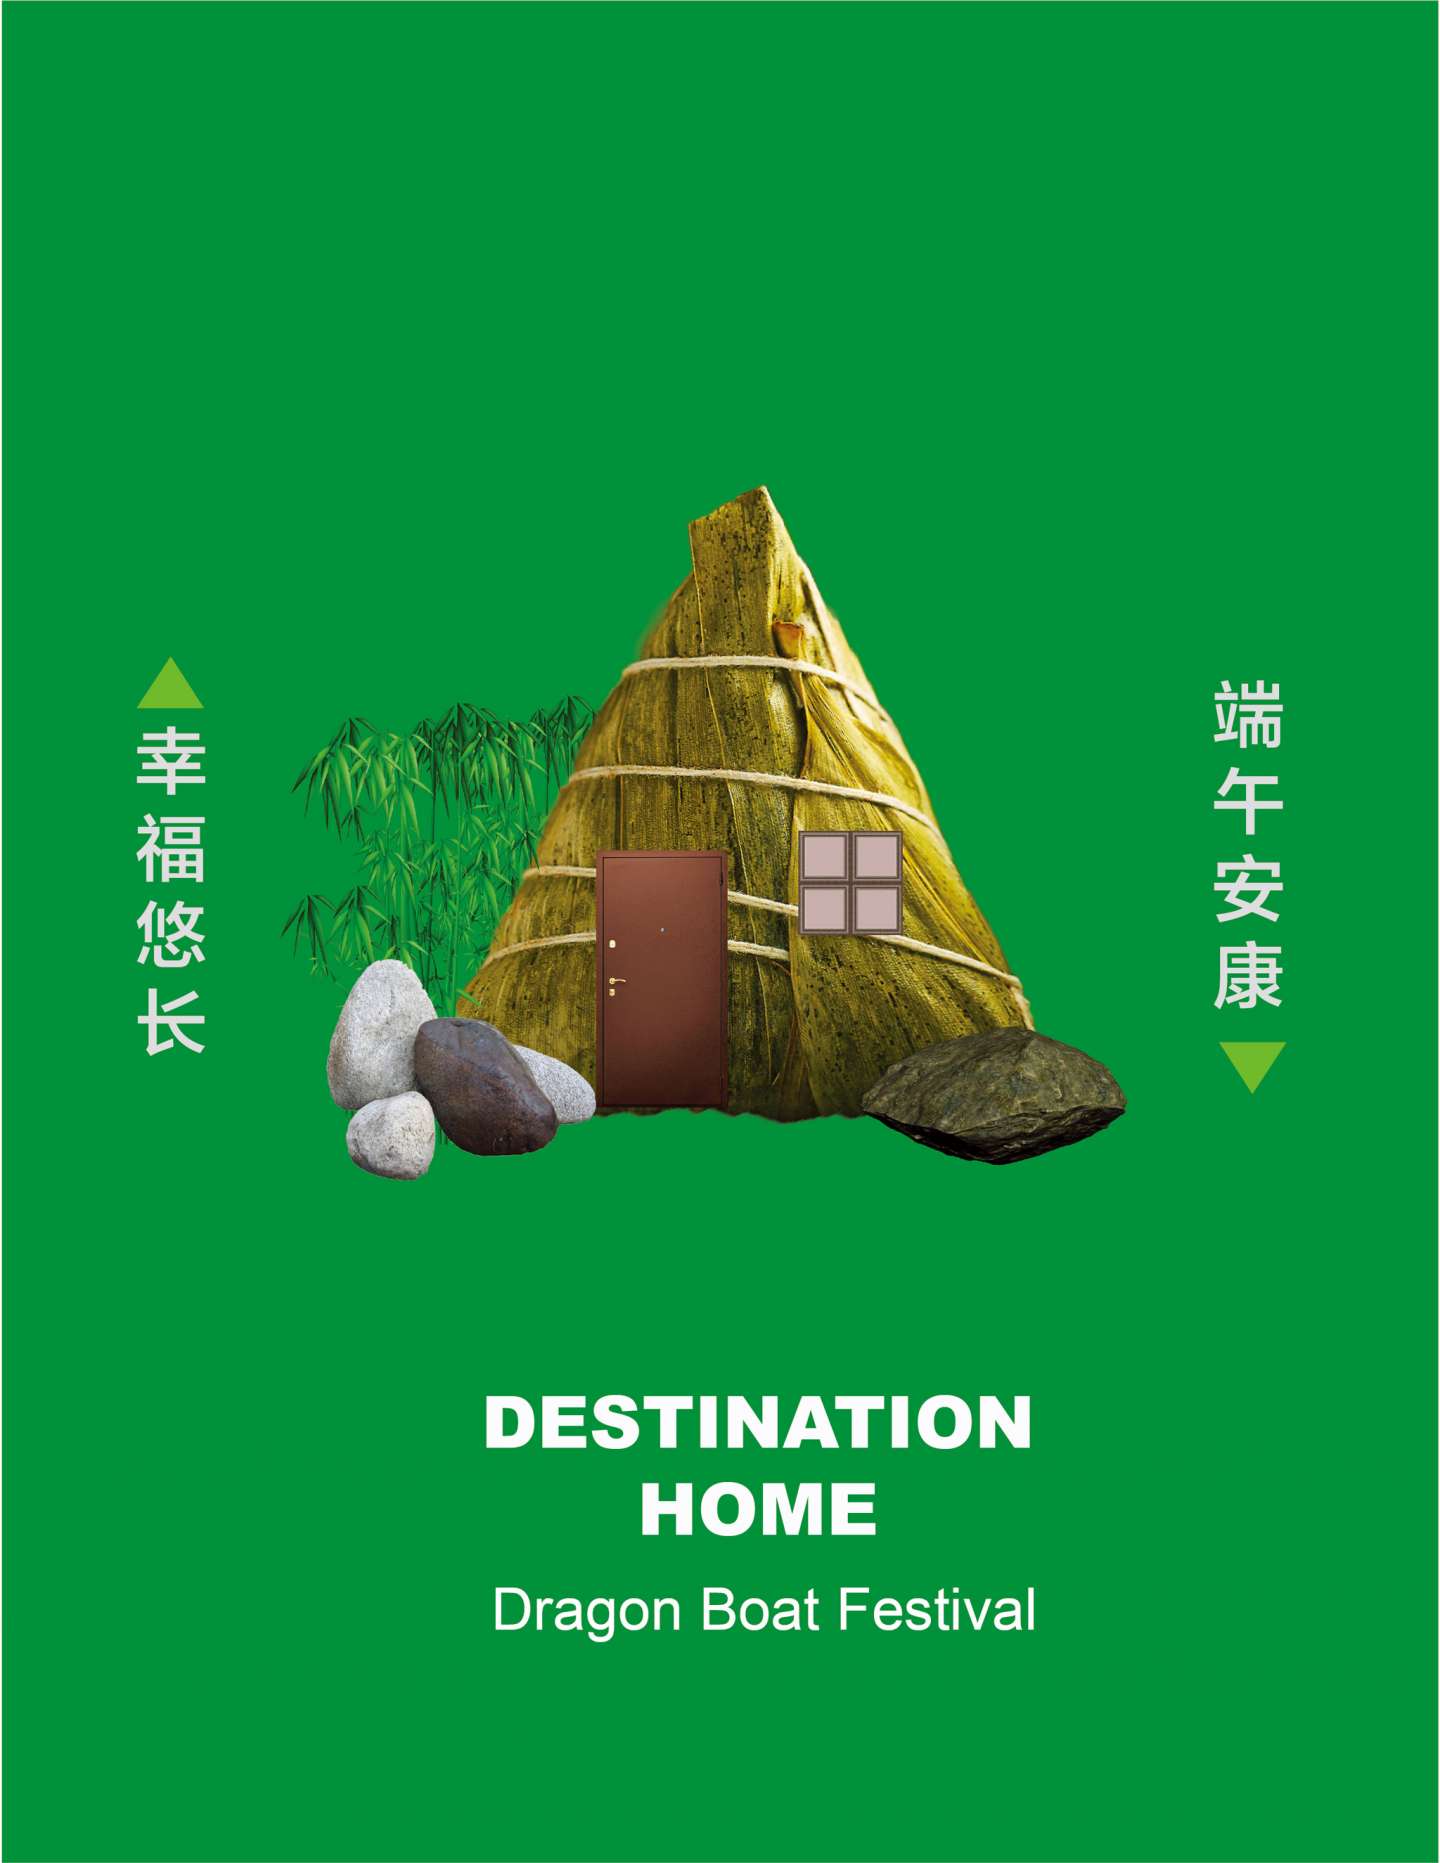 Chinese Festival Poster